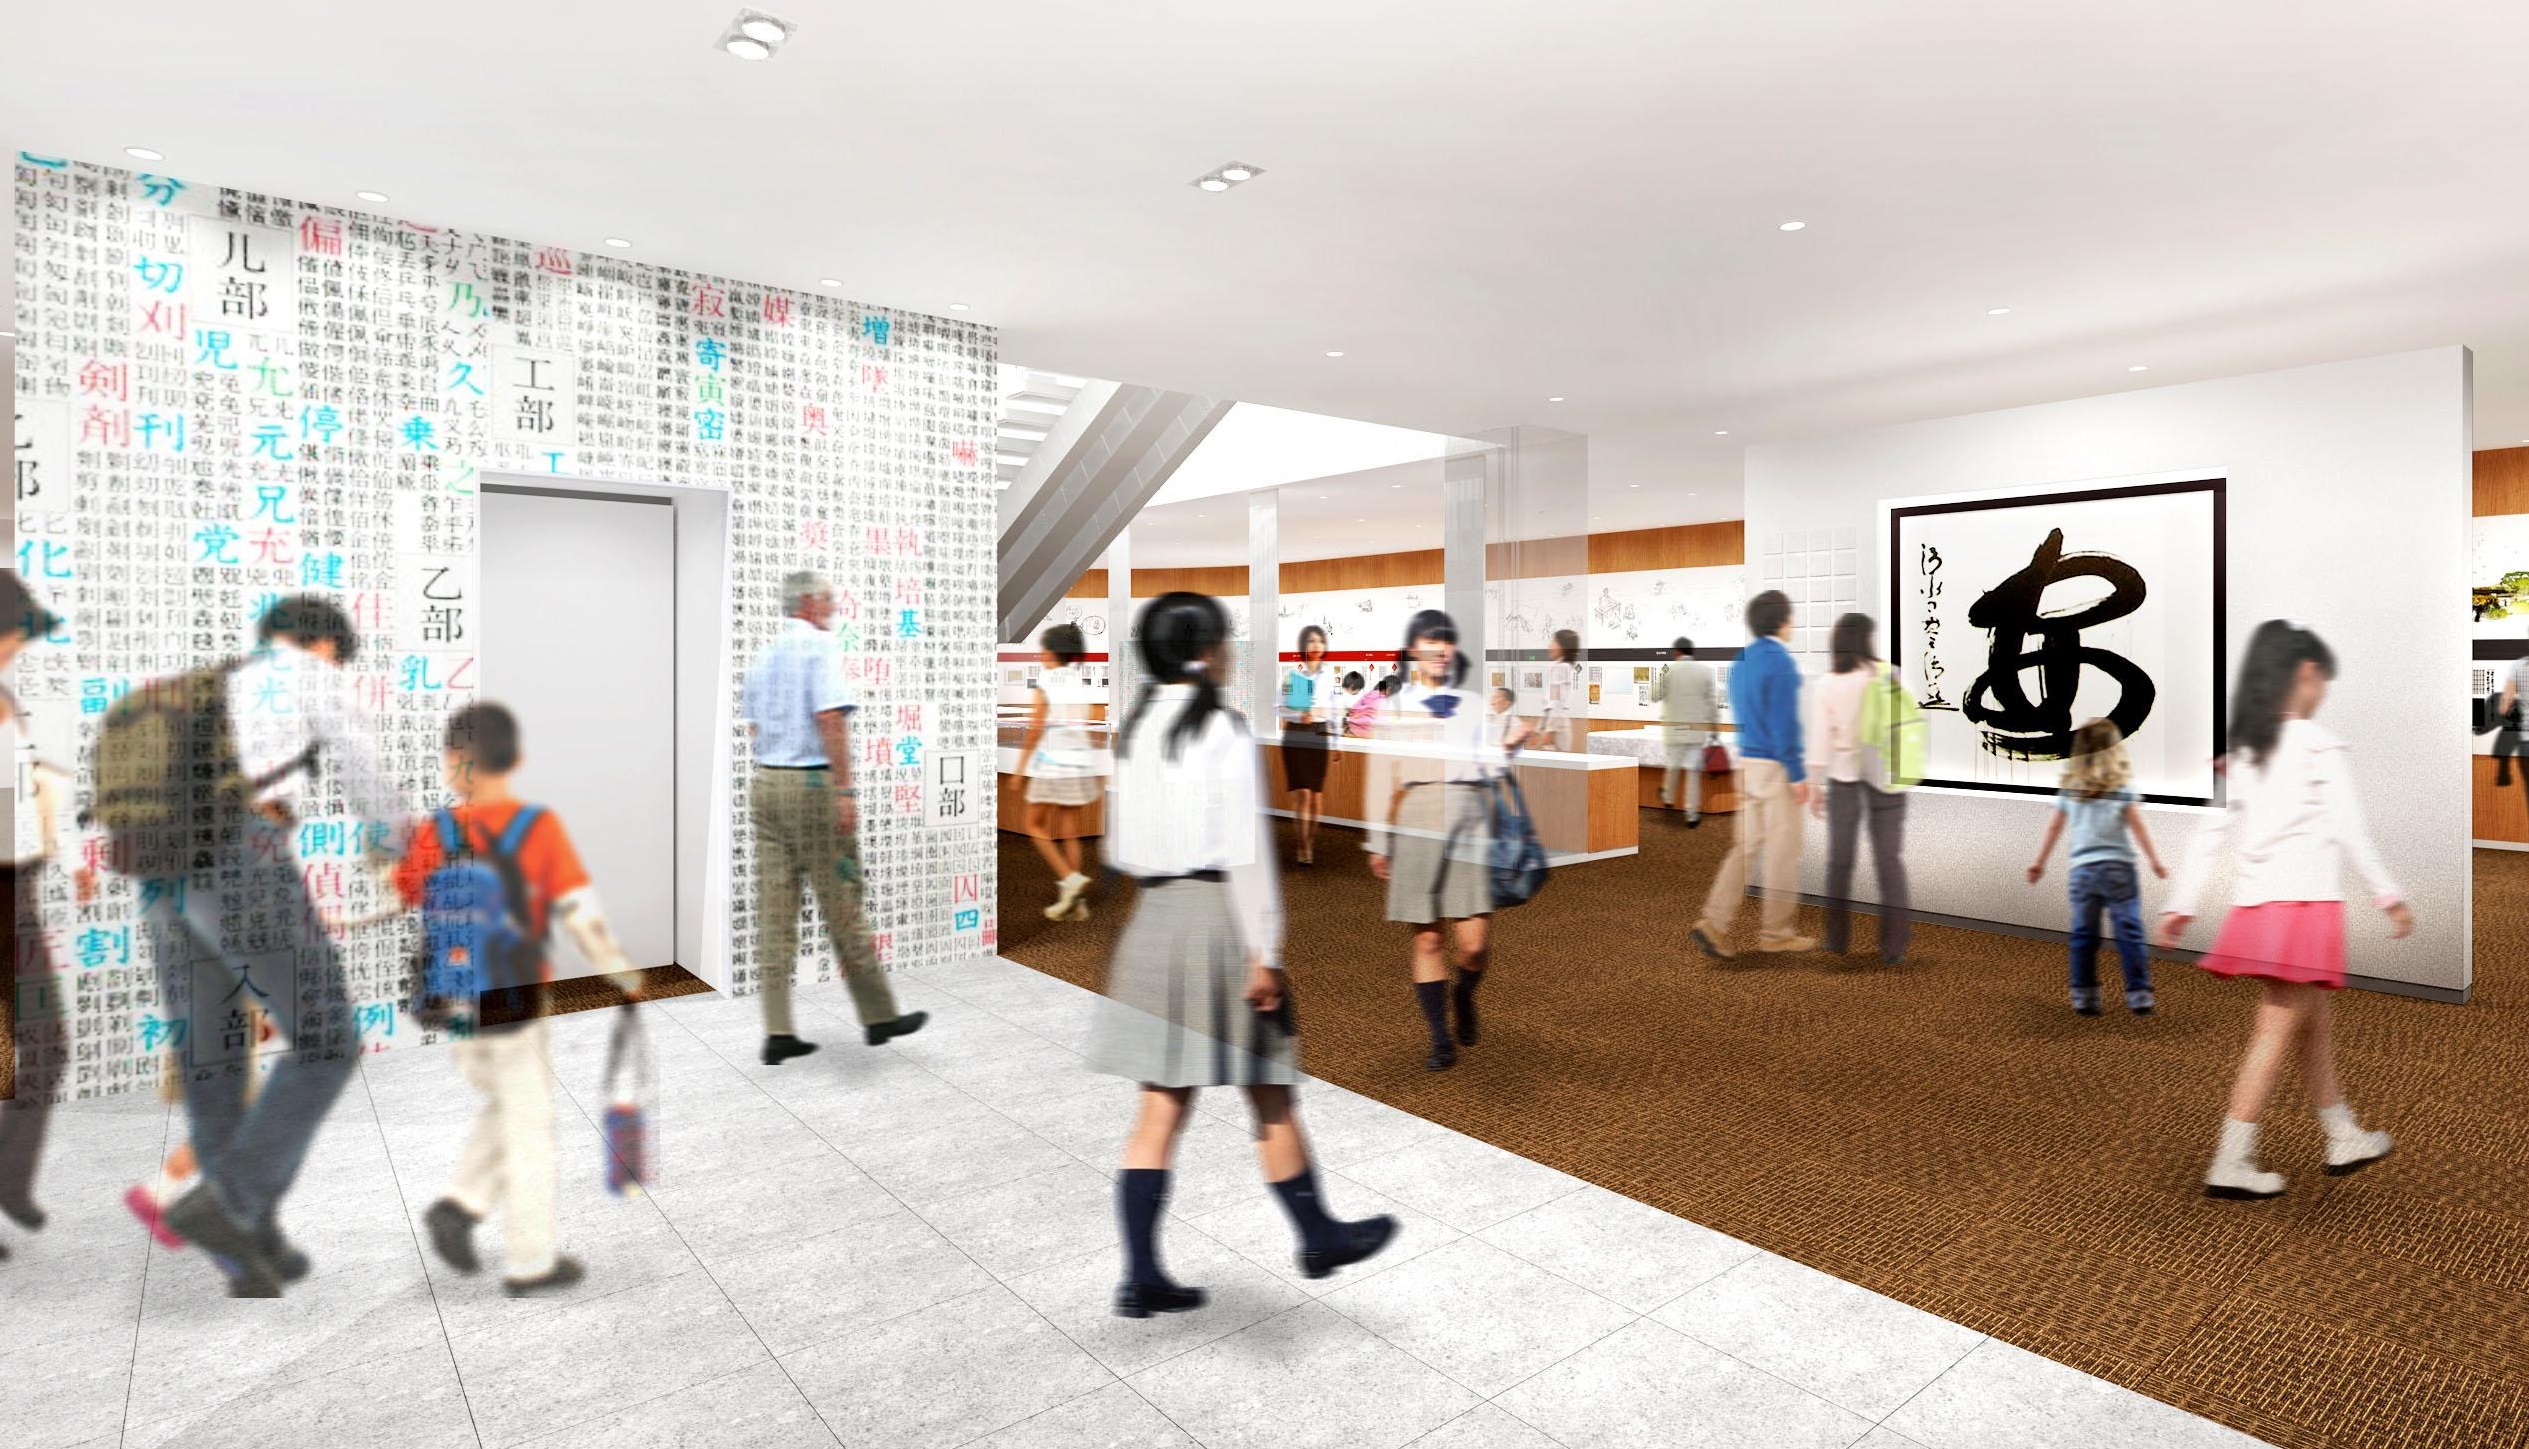 A computer rendering provided by the Japan Kanji Aptitude Testing Foundation shows the interior of the museum that it will launch in June in the city of Kyoto. | KYODO